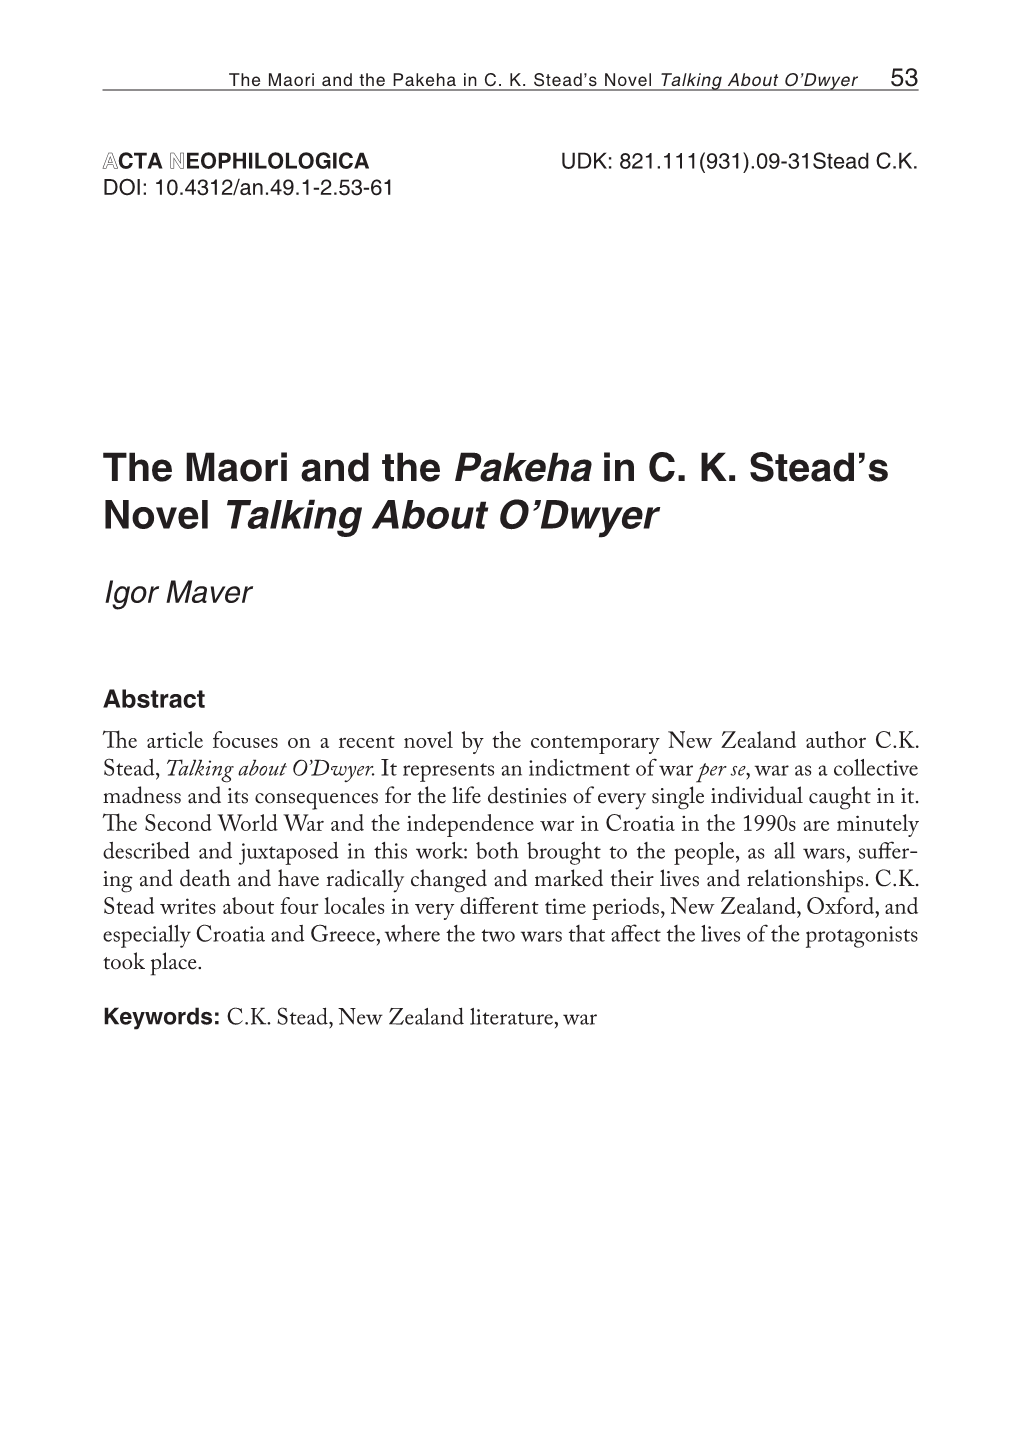 The Maori and the Pakeha in C. K. Stead's Novel Talking About O'dwyer